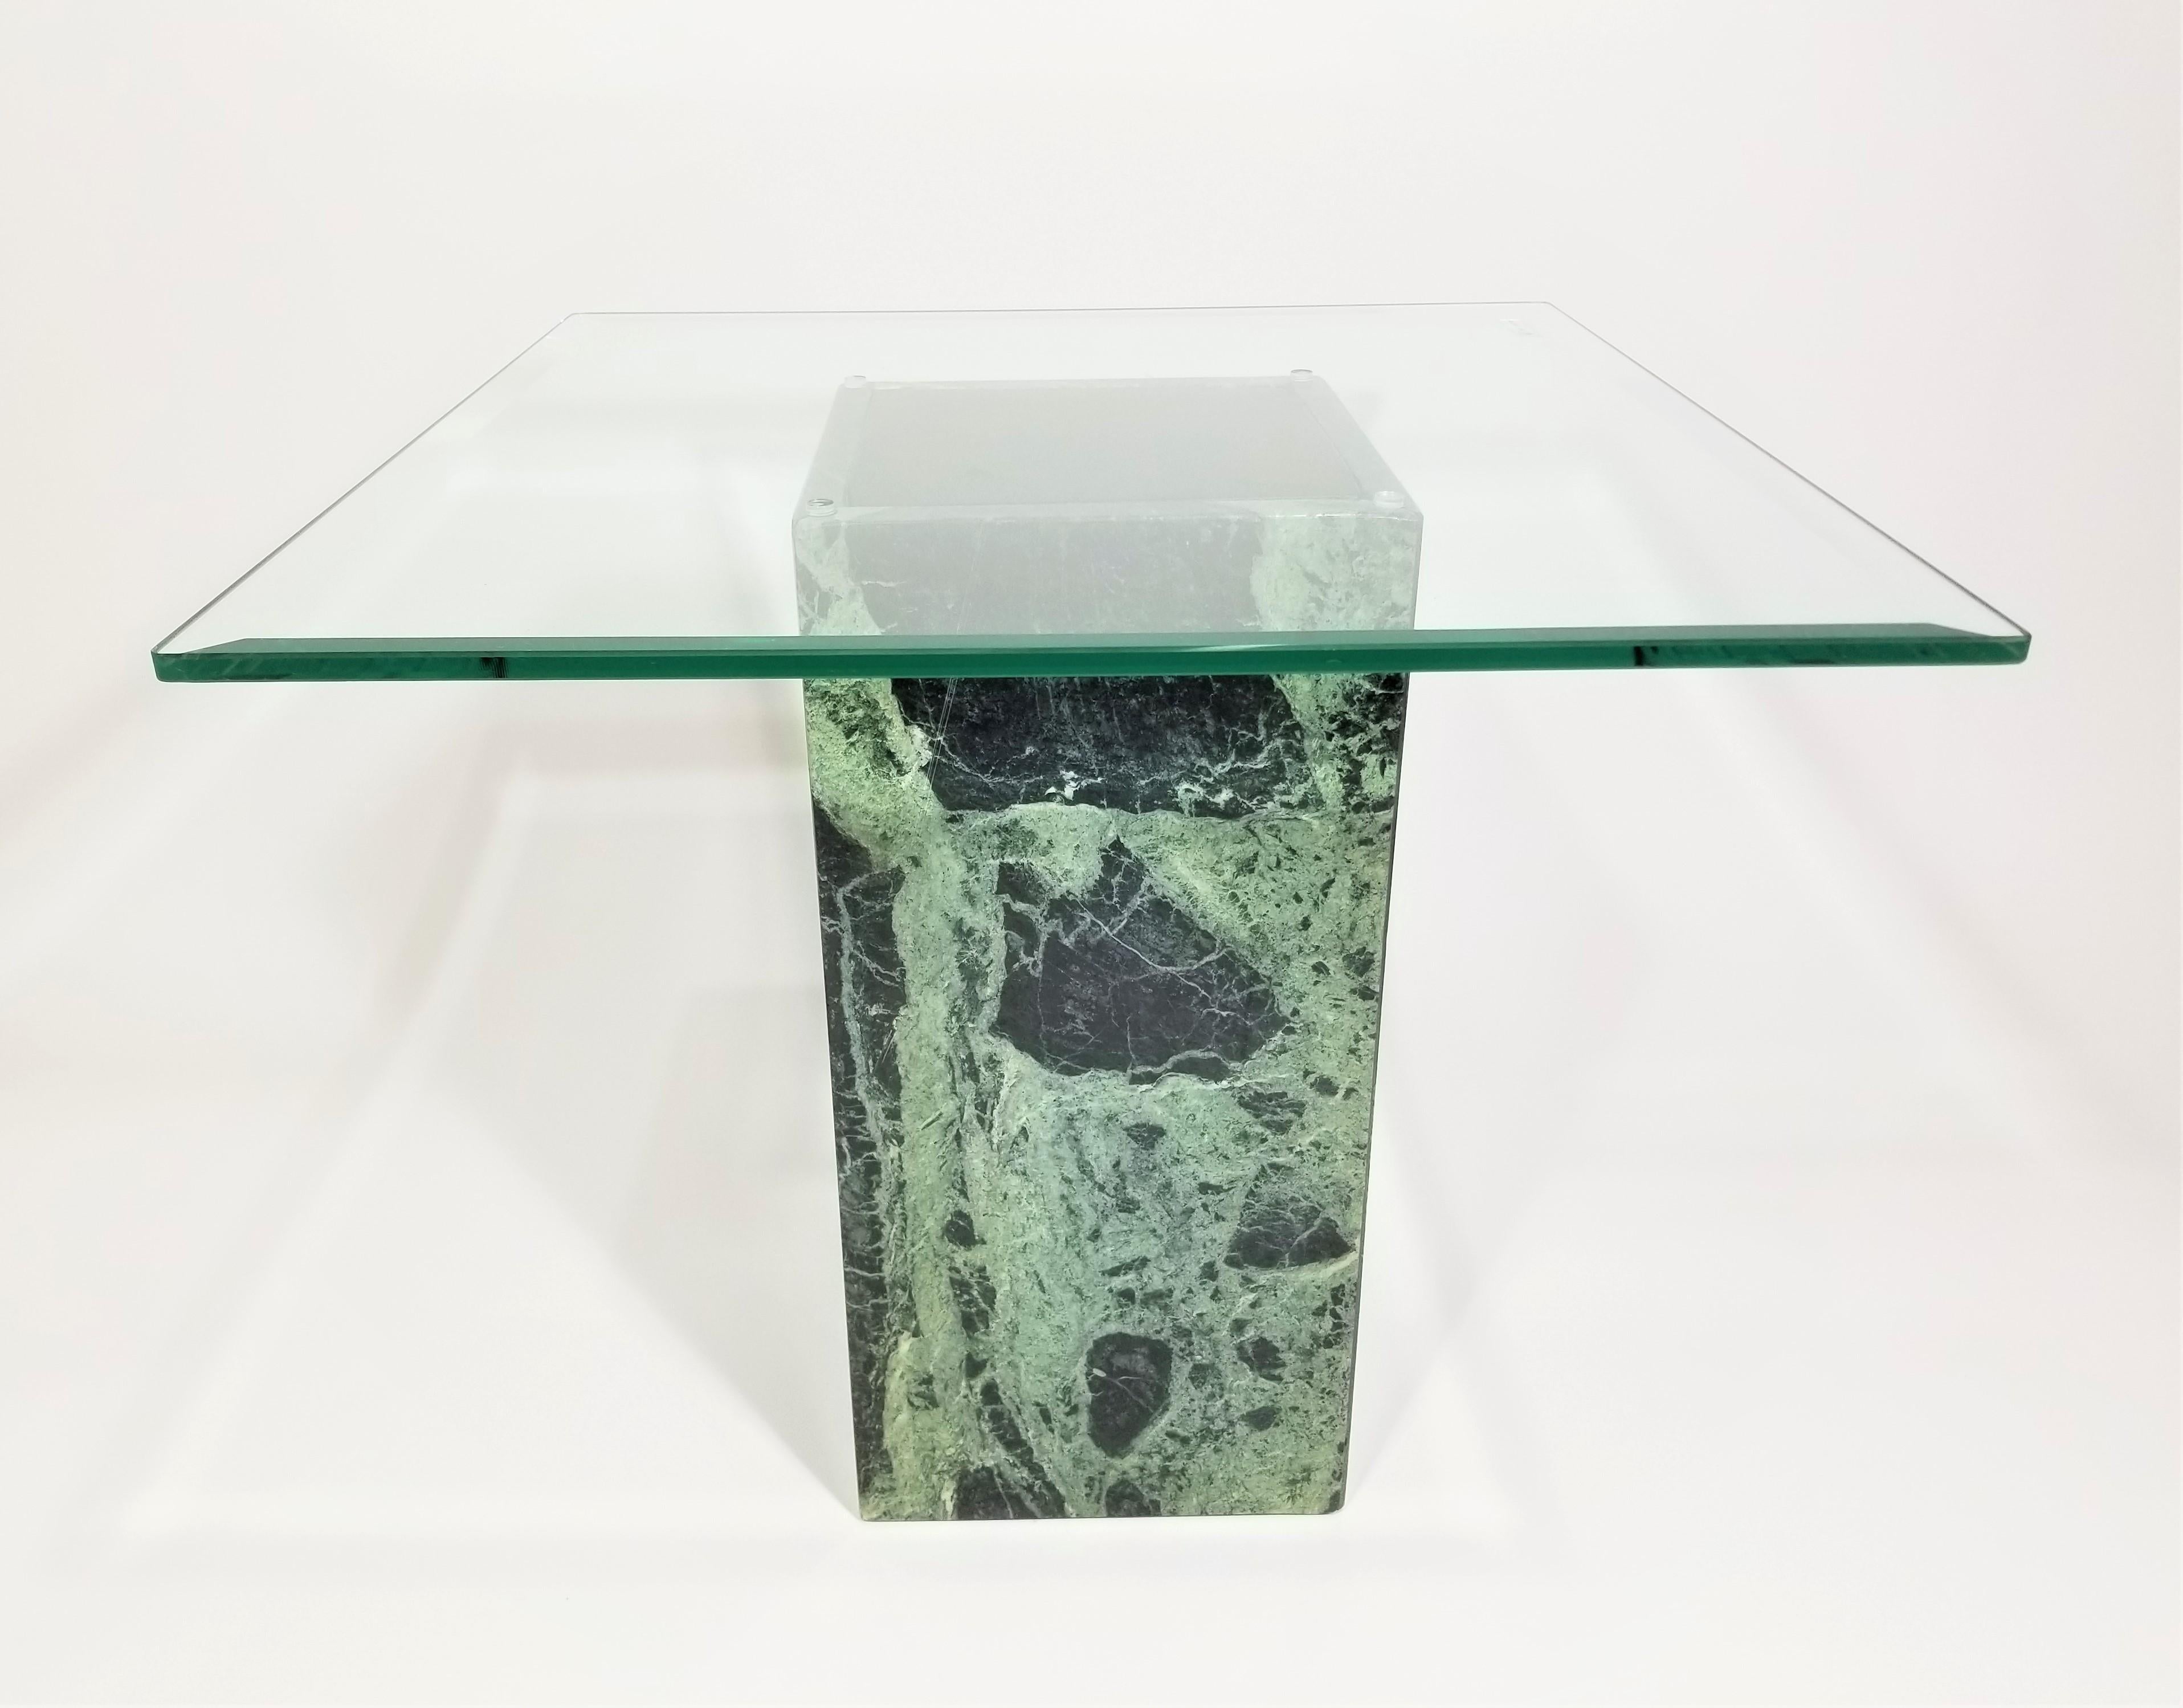 Mid century 1970s - 1980s green marble base with glass top end table or side table. Beautiful beveled substantial glass. Dark brown/ black leather on top of base. Glass top is in excellent condition. Marble base exhibits some minor wear consistent